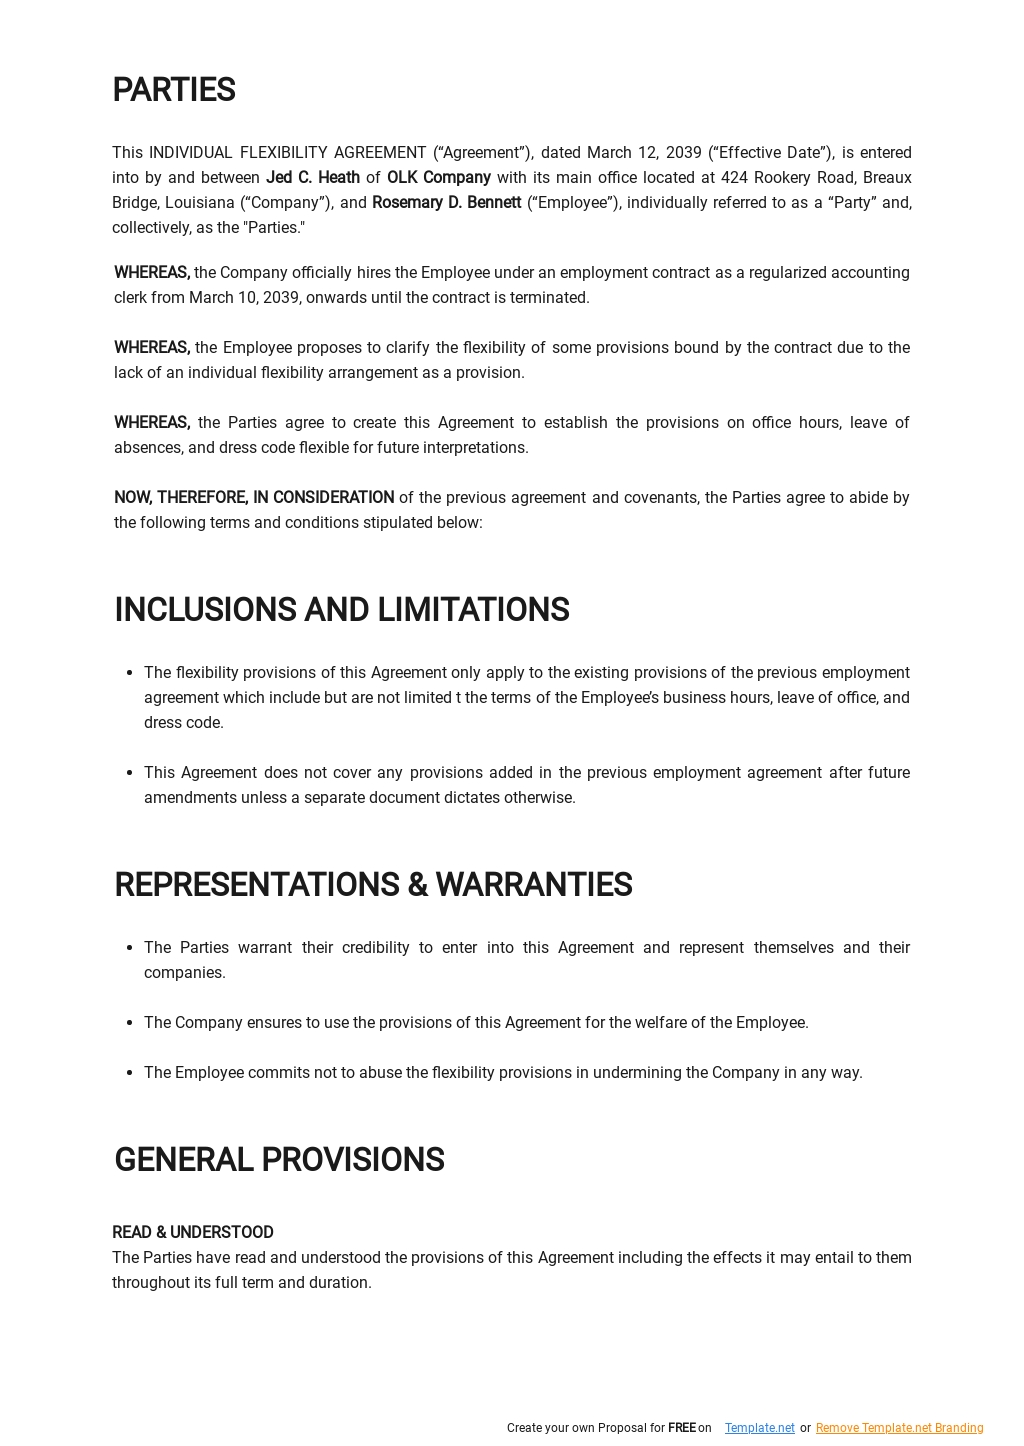 Individual Flexibility Agreement Template - Google Docs, Word Within individual flexibility agreement template